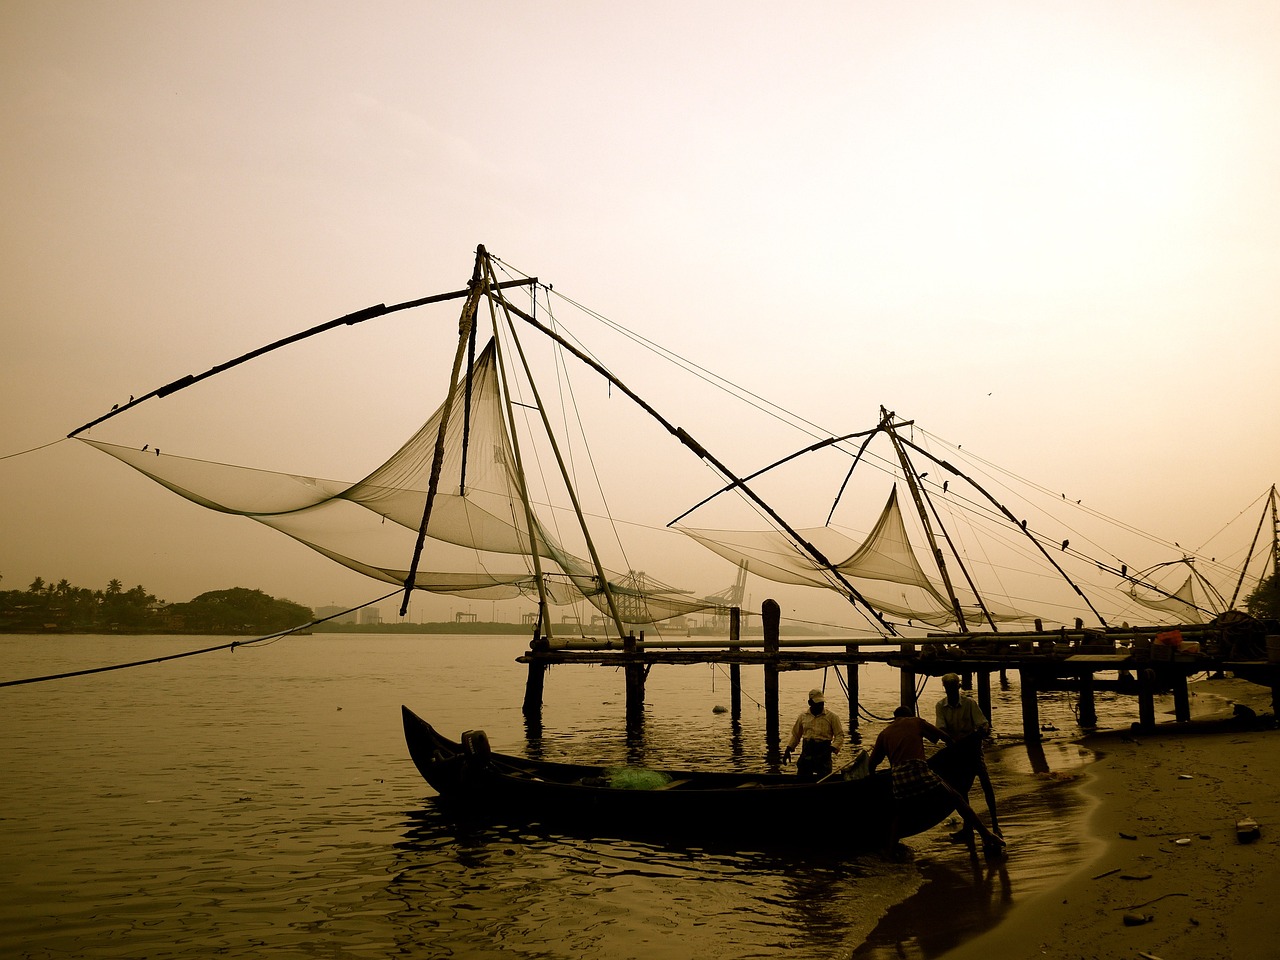 Kochi, Munnar, Thekkady, and Alleppey: A Week in the Heart of Kerala